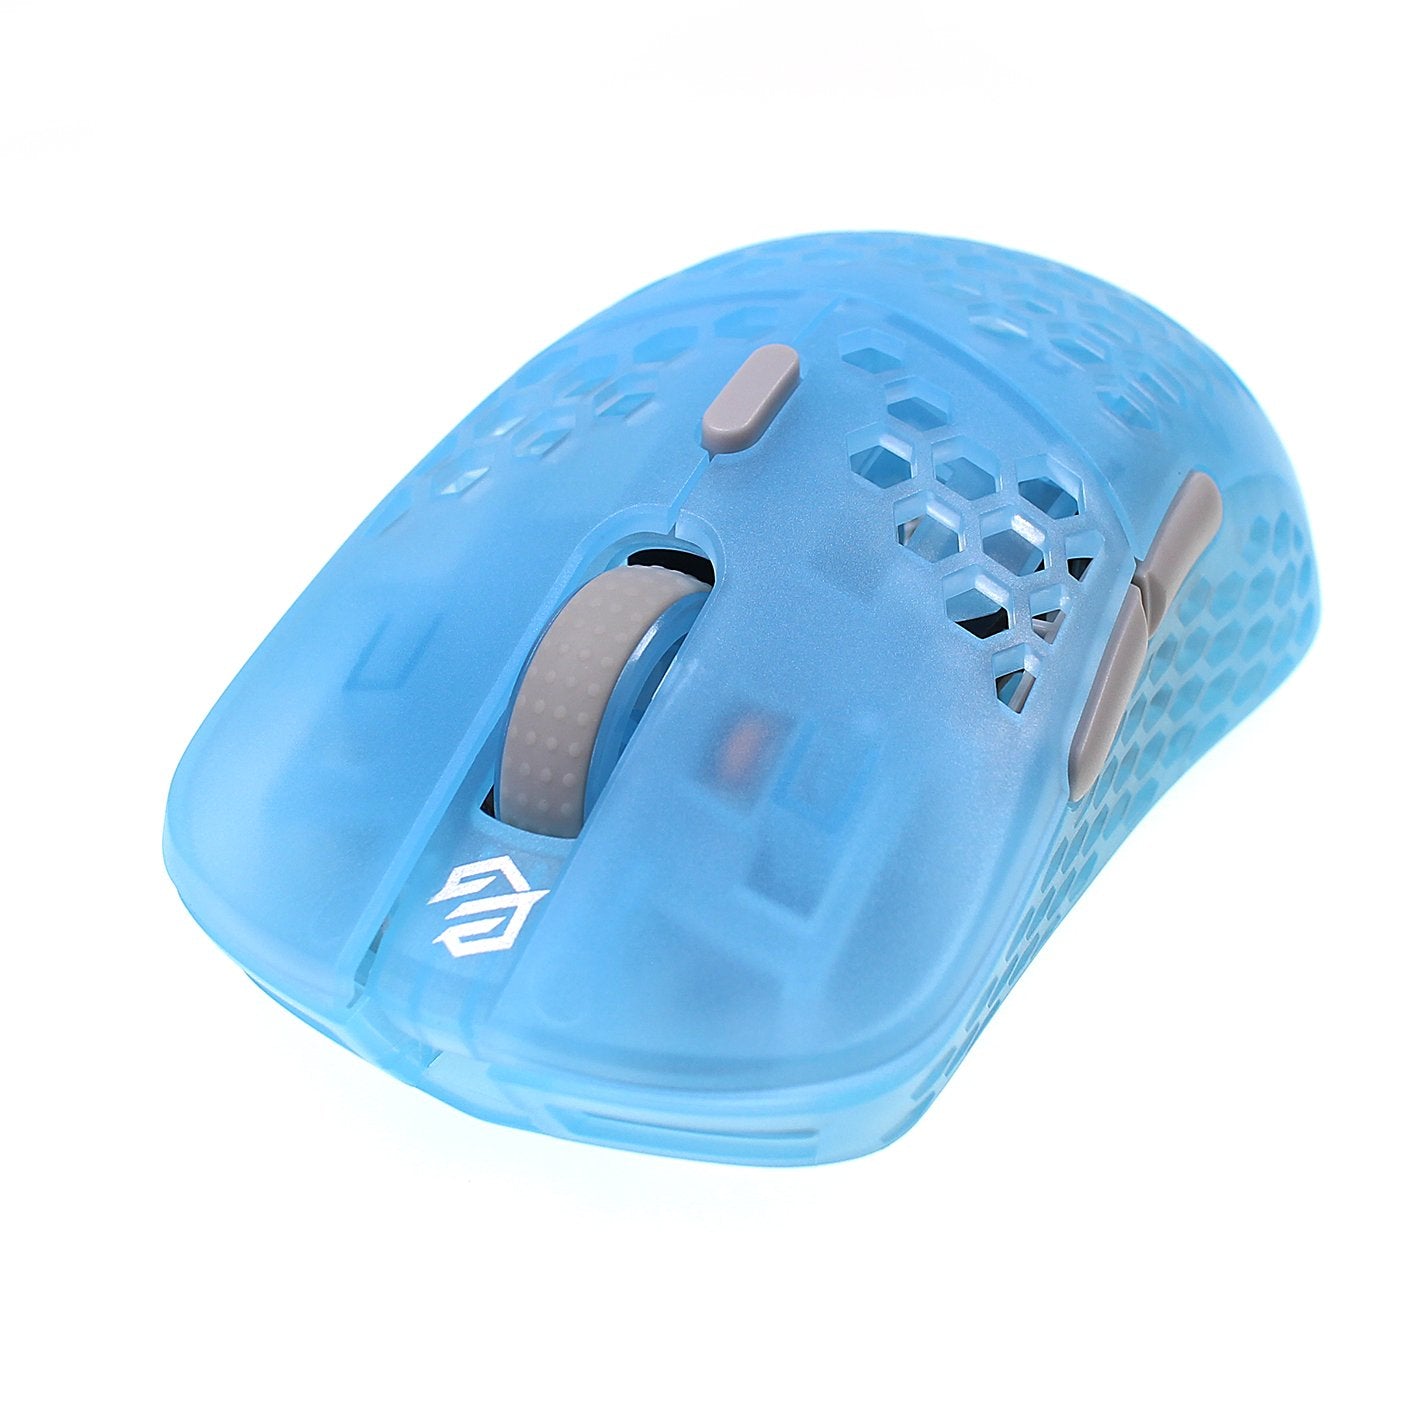 G-wolves Hati Small HTS Transparent Blue Wired Gaming Mouse : Inc – Addice Inc